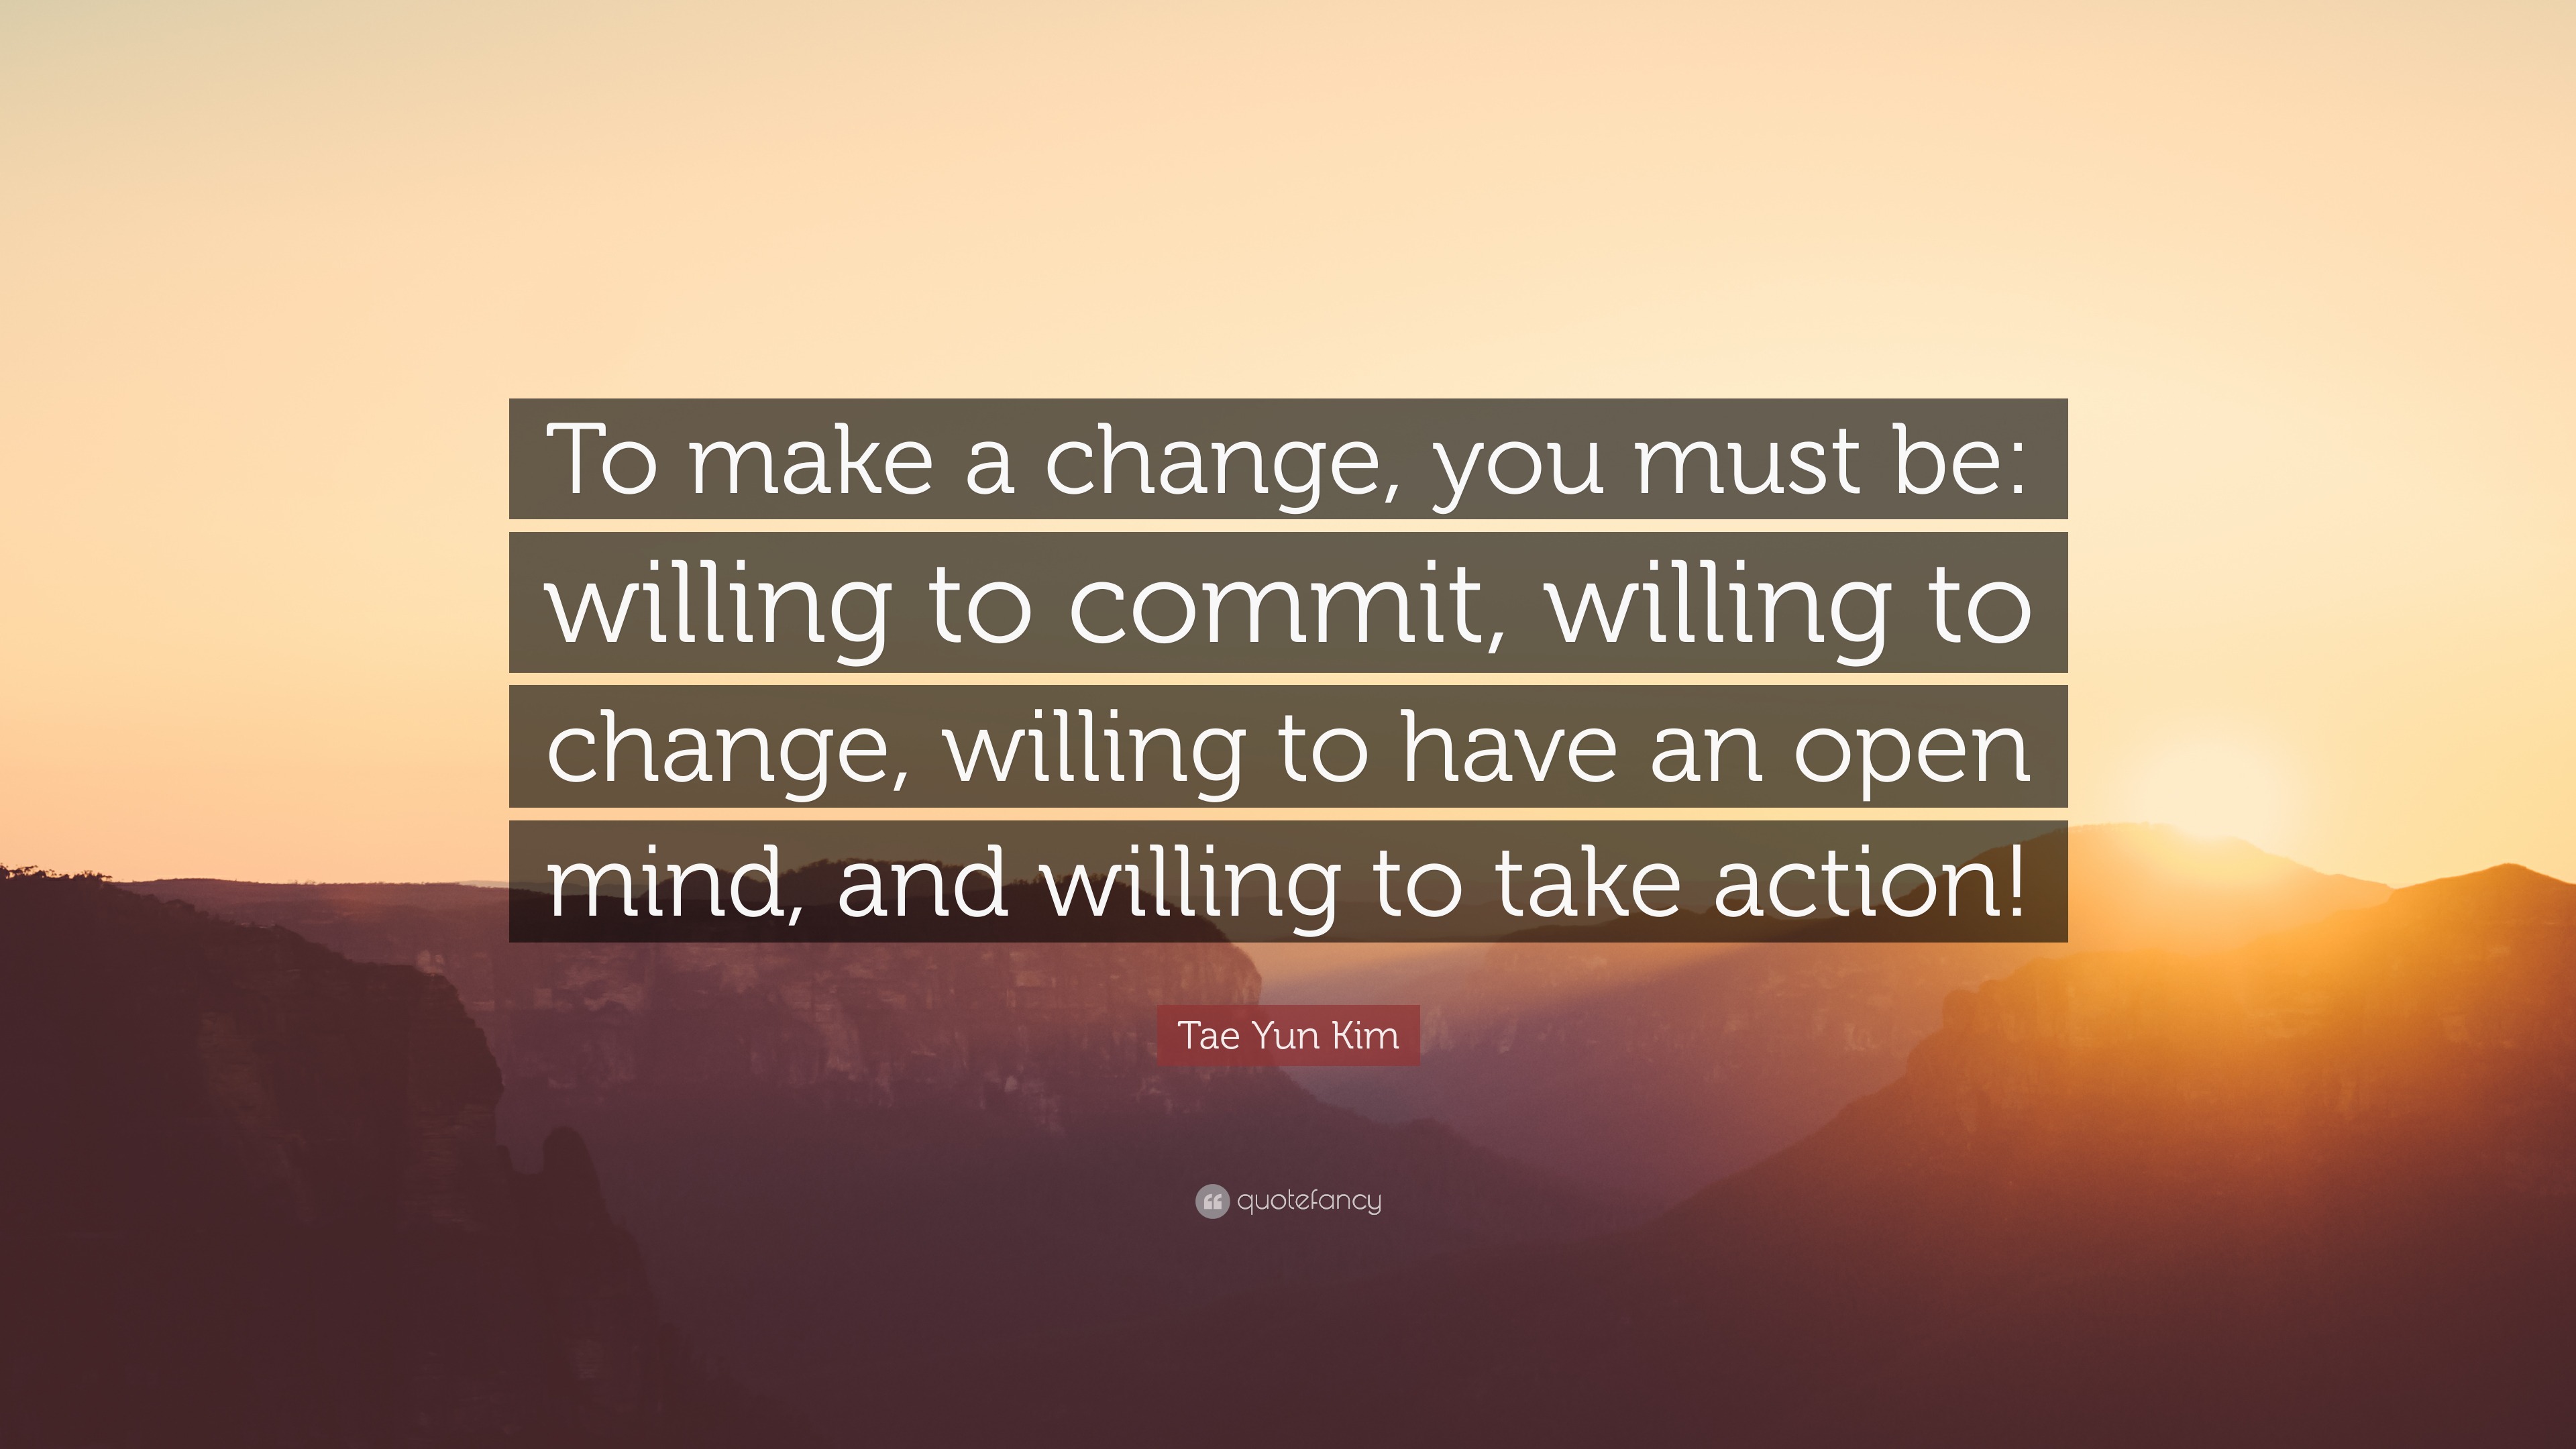 Tae Yun Kim Quote: “To make a change, you must be: willing to commit ...